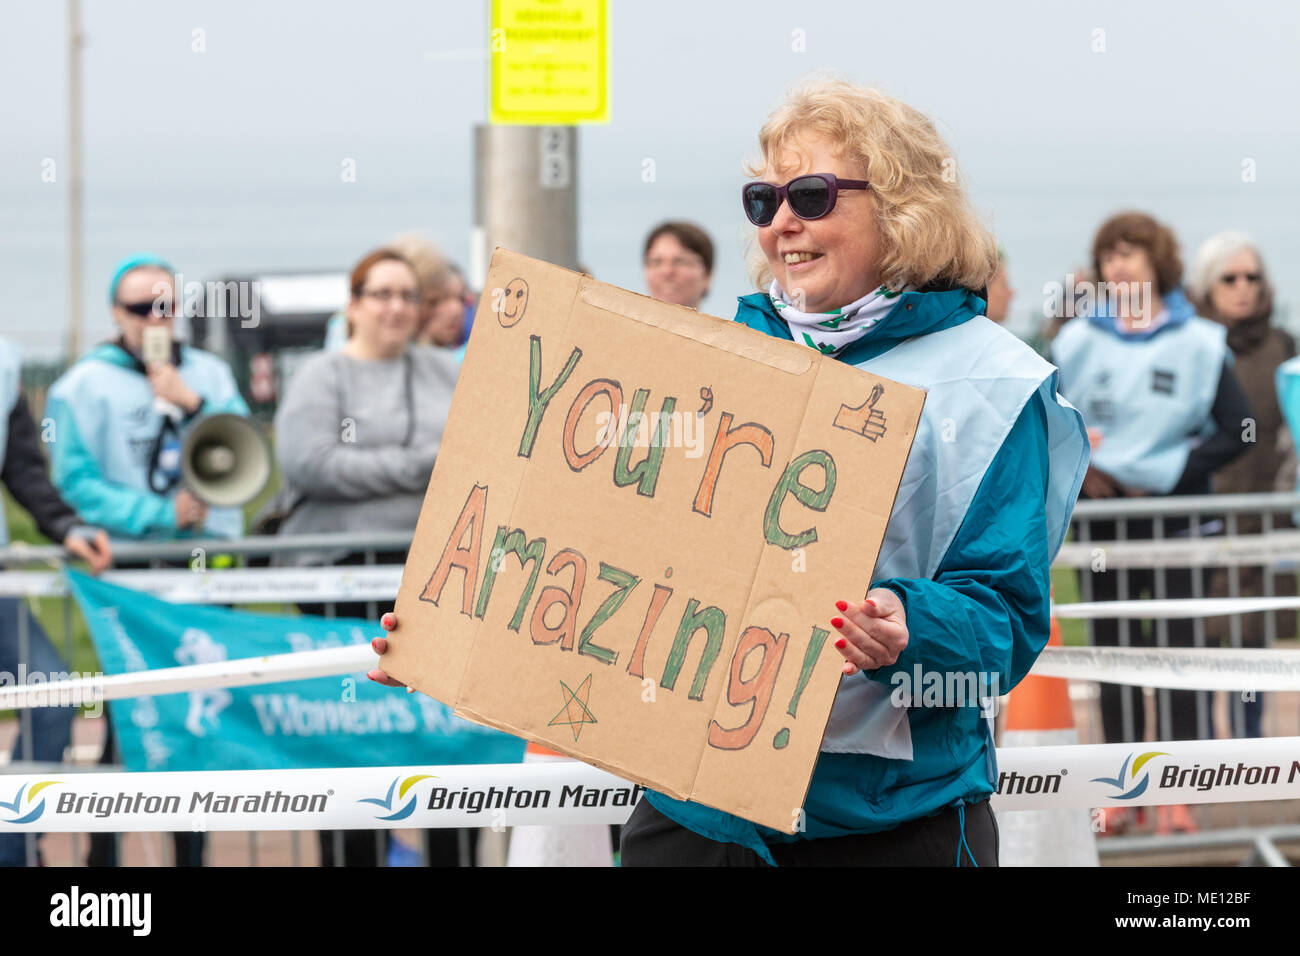 Brighton, Sussex, UK; 15th April 2018; Volunteer Encourages Runners in the Brighton 10K Race With an Inspirational Message Written on a Homemade Sign Stock Photo